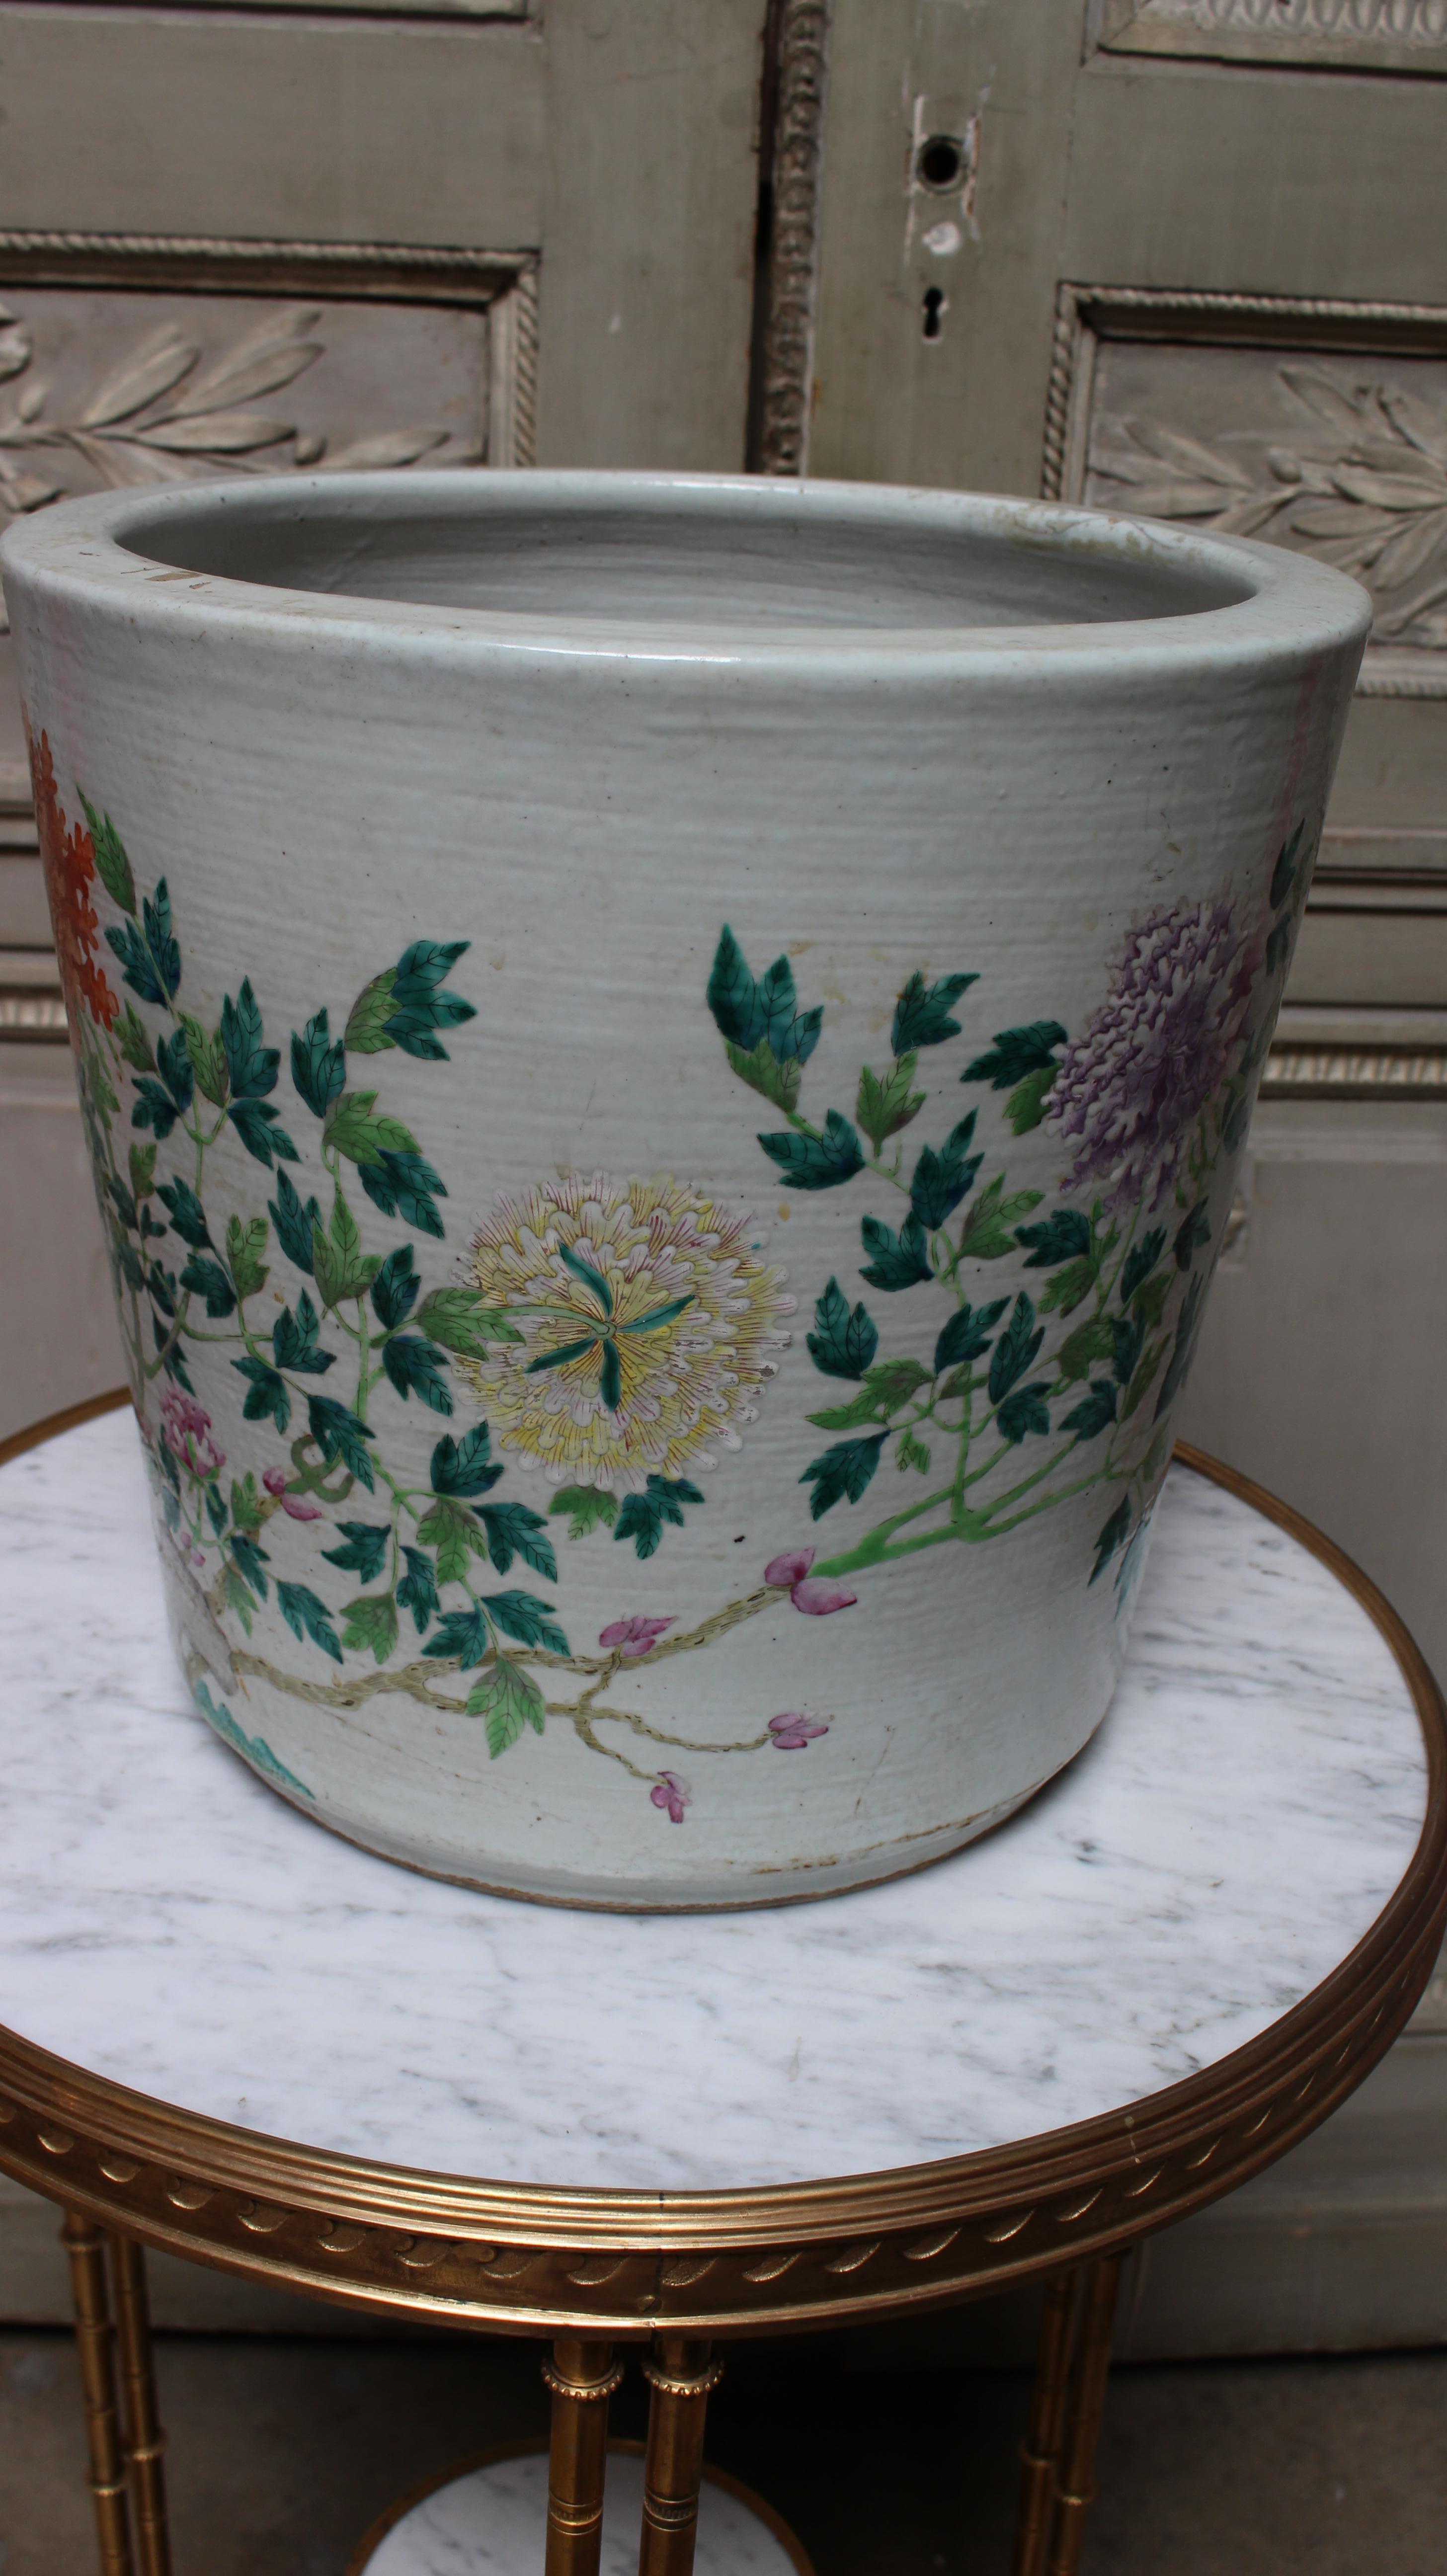 A 19th century large Famille Rose Chinese porcelain jardiniere or planter depicting a scenic landscape of chrysanthemums and other floral still life. 